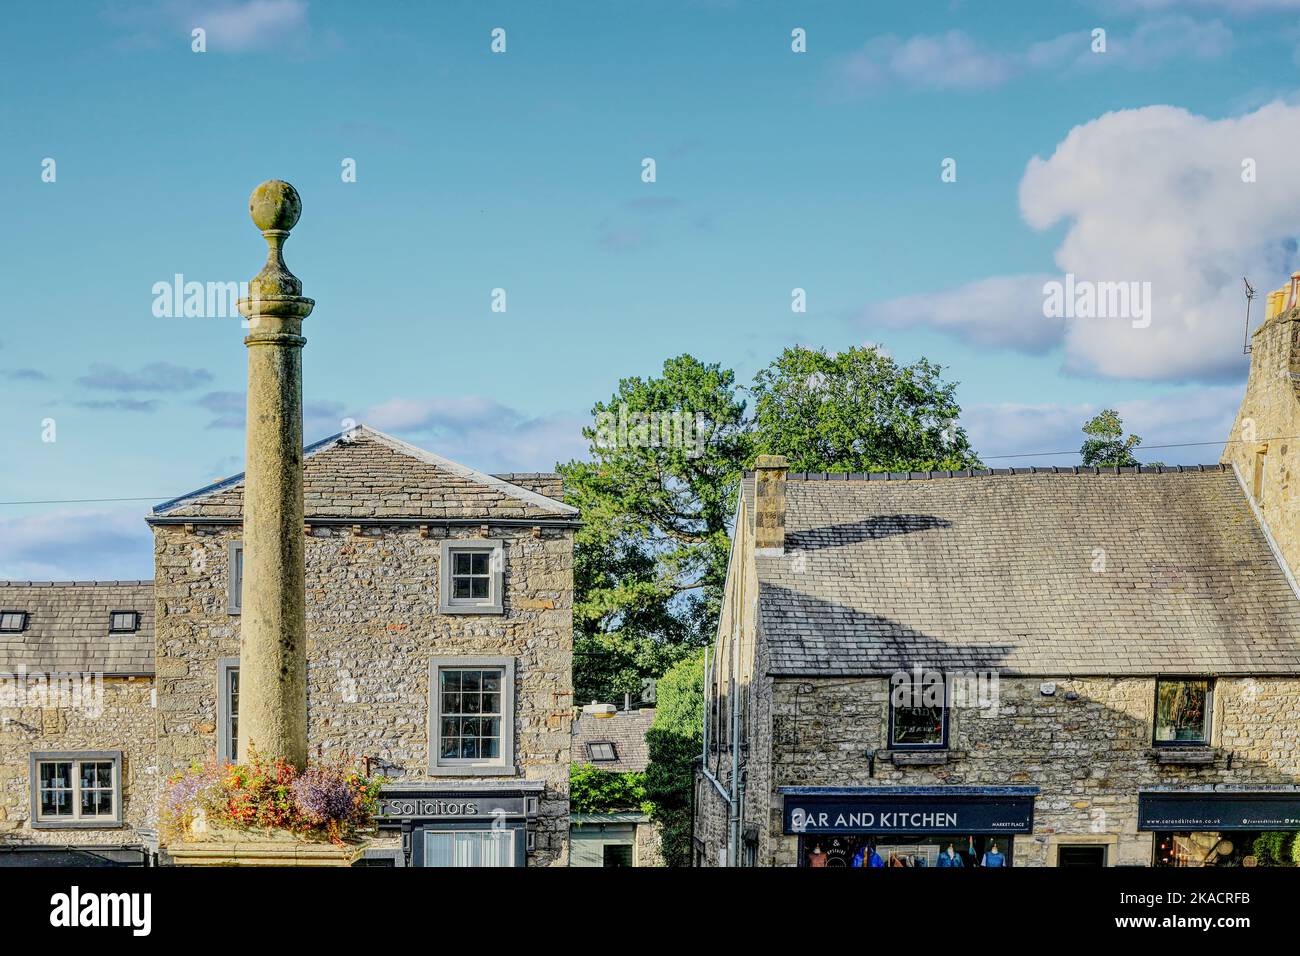 The Market Square and war memorial, Settle, North Yorkshire, England, UK Stock Photo